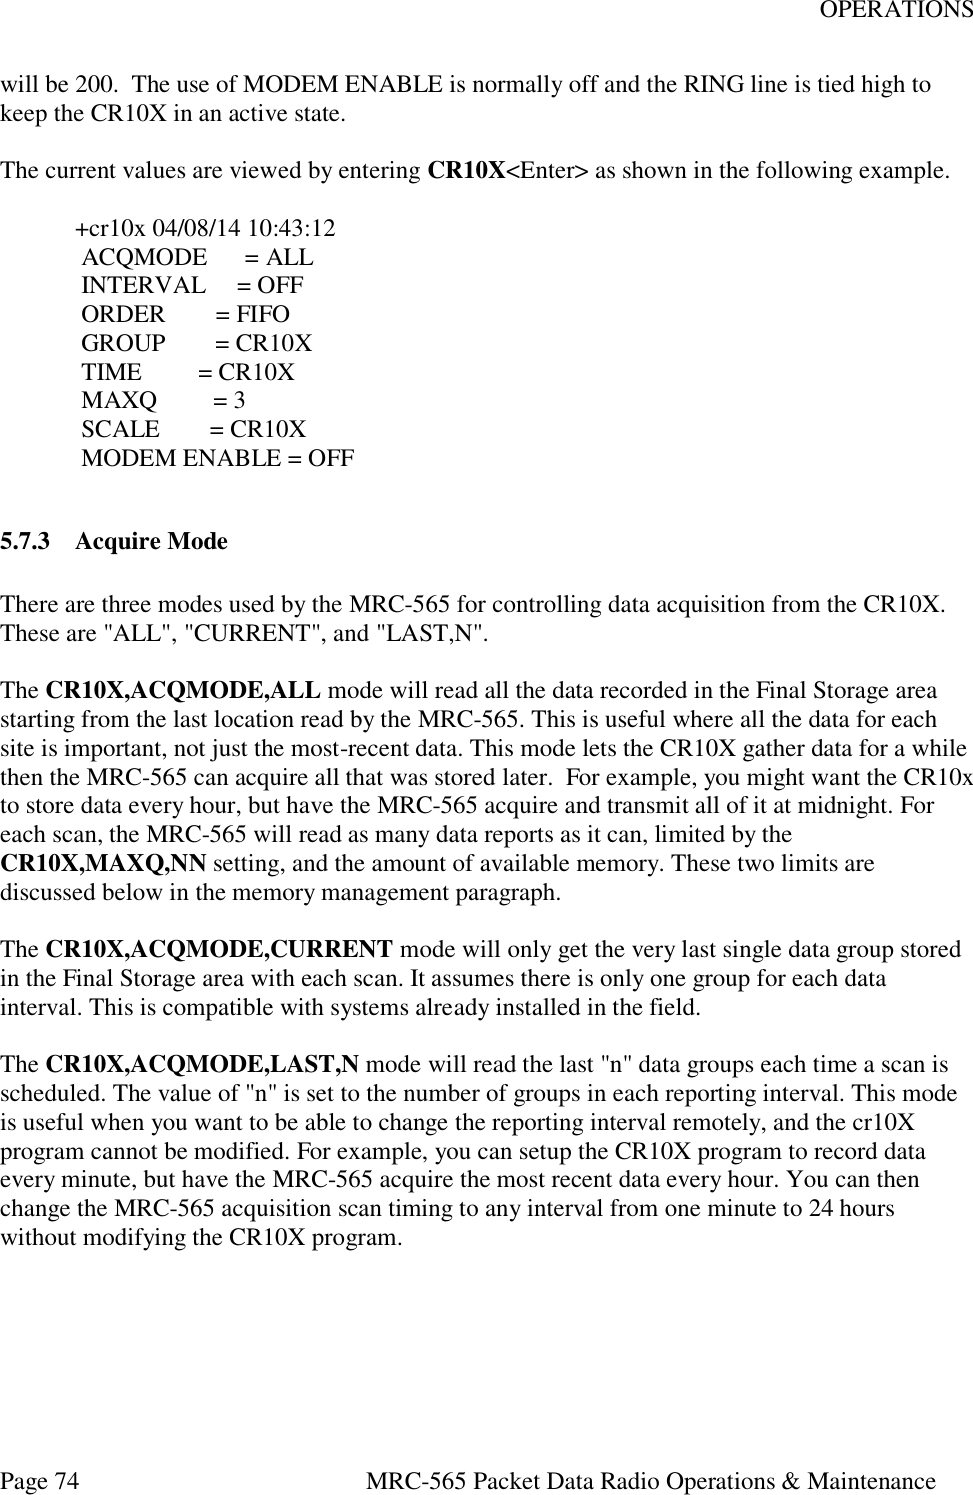 OPERATIONS Page 74  MRC-565 Packet Data Radio Operations &amp; Maintenance will be 200.  The use of MODEM ENABLE is normally off and the RING line is tied high to keep the CR10X in an active state.  The current values are viewed by entering CR10X&lt;Enter&gt; as shown in the following example.  +cr10x 04/08/14 10:43:12  ACQMODE      = ALL      INTERVAL     = OFF  ORDER        = FIFO  GROUP        = CR10X  TIME         = CR10X  MAXQ         = 3    SCALE        = CR10X  MODEM ENABLE = OFF  5.7.3 Acquire Mode  There are three modes used by the MRC-565 for controlling data acquisition from the CR10X.  These are &quot;ALL&quot;, &quot;CURRENT&quot;, and &quot;LAST,N&quot;.   The CR10X,ACQMODE,ALL mode will read all the data recorded in the Final Storage area starting from the last location read by the MRC-565. This is useful where all the data for each site is important, not just the most-recent data. This mode lets the CR10X gather data for a while then the MRC-565 can acquire all that was stored later.  For example, you might want the CR10x to store data every hour, but have the MRC-565 acquire and transmit all of it at midnight. For each scan, the MRC-565 will read as many data reports as it can, limited by the CR10X,MAXQ,NN setting, and the amount of available memory. These two limits are discussed below in the memory management paragraph.  The CR10X,ACQMODE,CURRENT mode will only get the very last single data group stored in the Final Storage area with each scan. It assumes there is only one group for each data interval. This is compatible with systems already installed in the field.   The CR10X,ACQMODE,LAST,N mode will read the last &quot;n&quot; data groups each time a scan is scheduled. The value of &quot;n&quot; is set to the number of groups in each reporting interval. This mode is useful when you want to be able to change the reporting interval remotely, and the cr10X program cannot be modified. For example, you can setup the CR10X program to record data every minute, but have the MRC-565 acquire the most recent data every hour. You can then change the MRC-565 acquisition scan timing to any interval from one minute to 24 hours without modifying the CR10X program.  